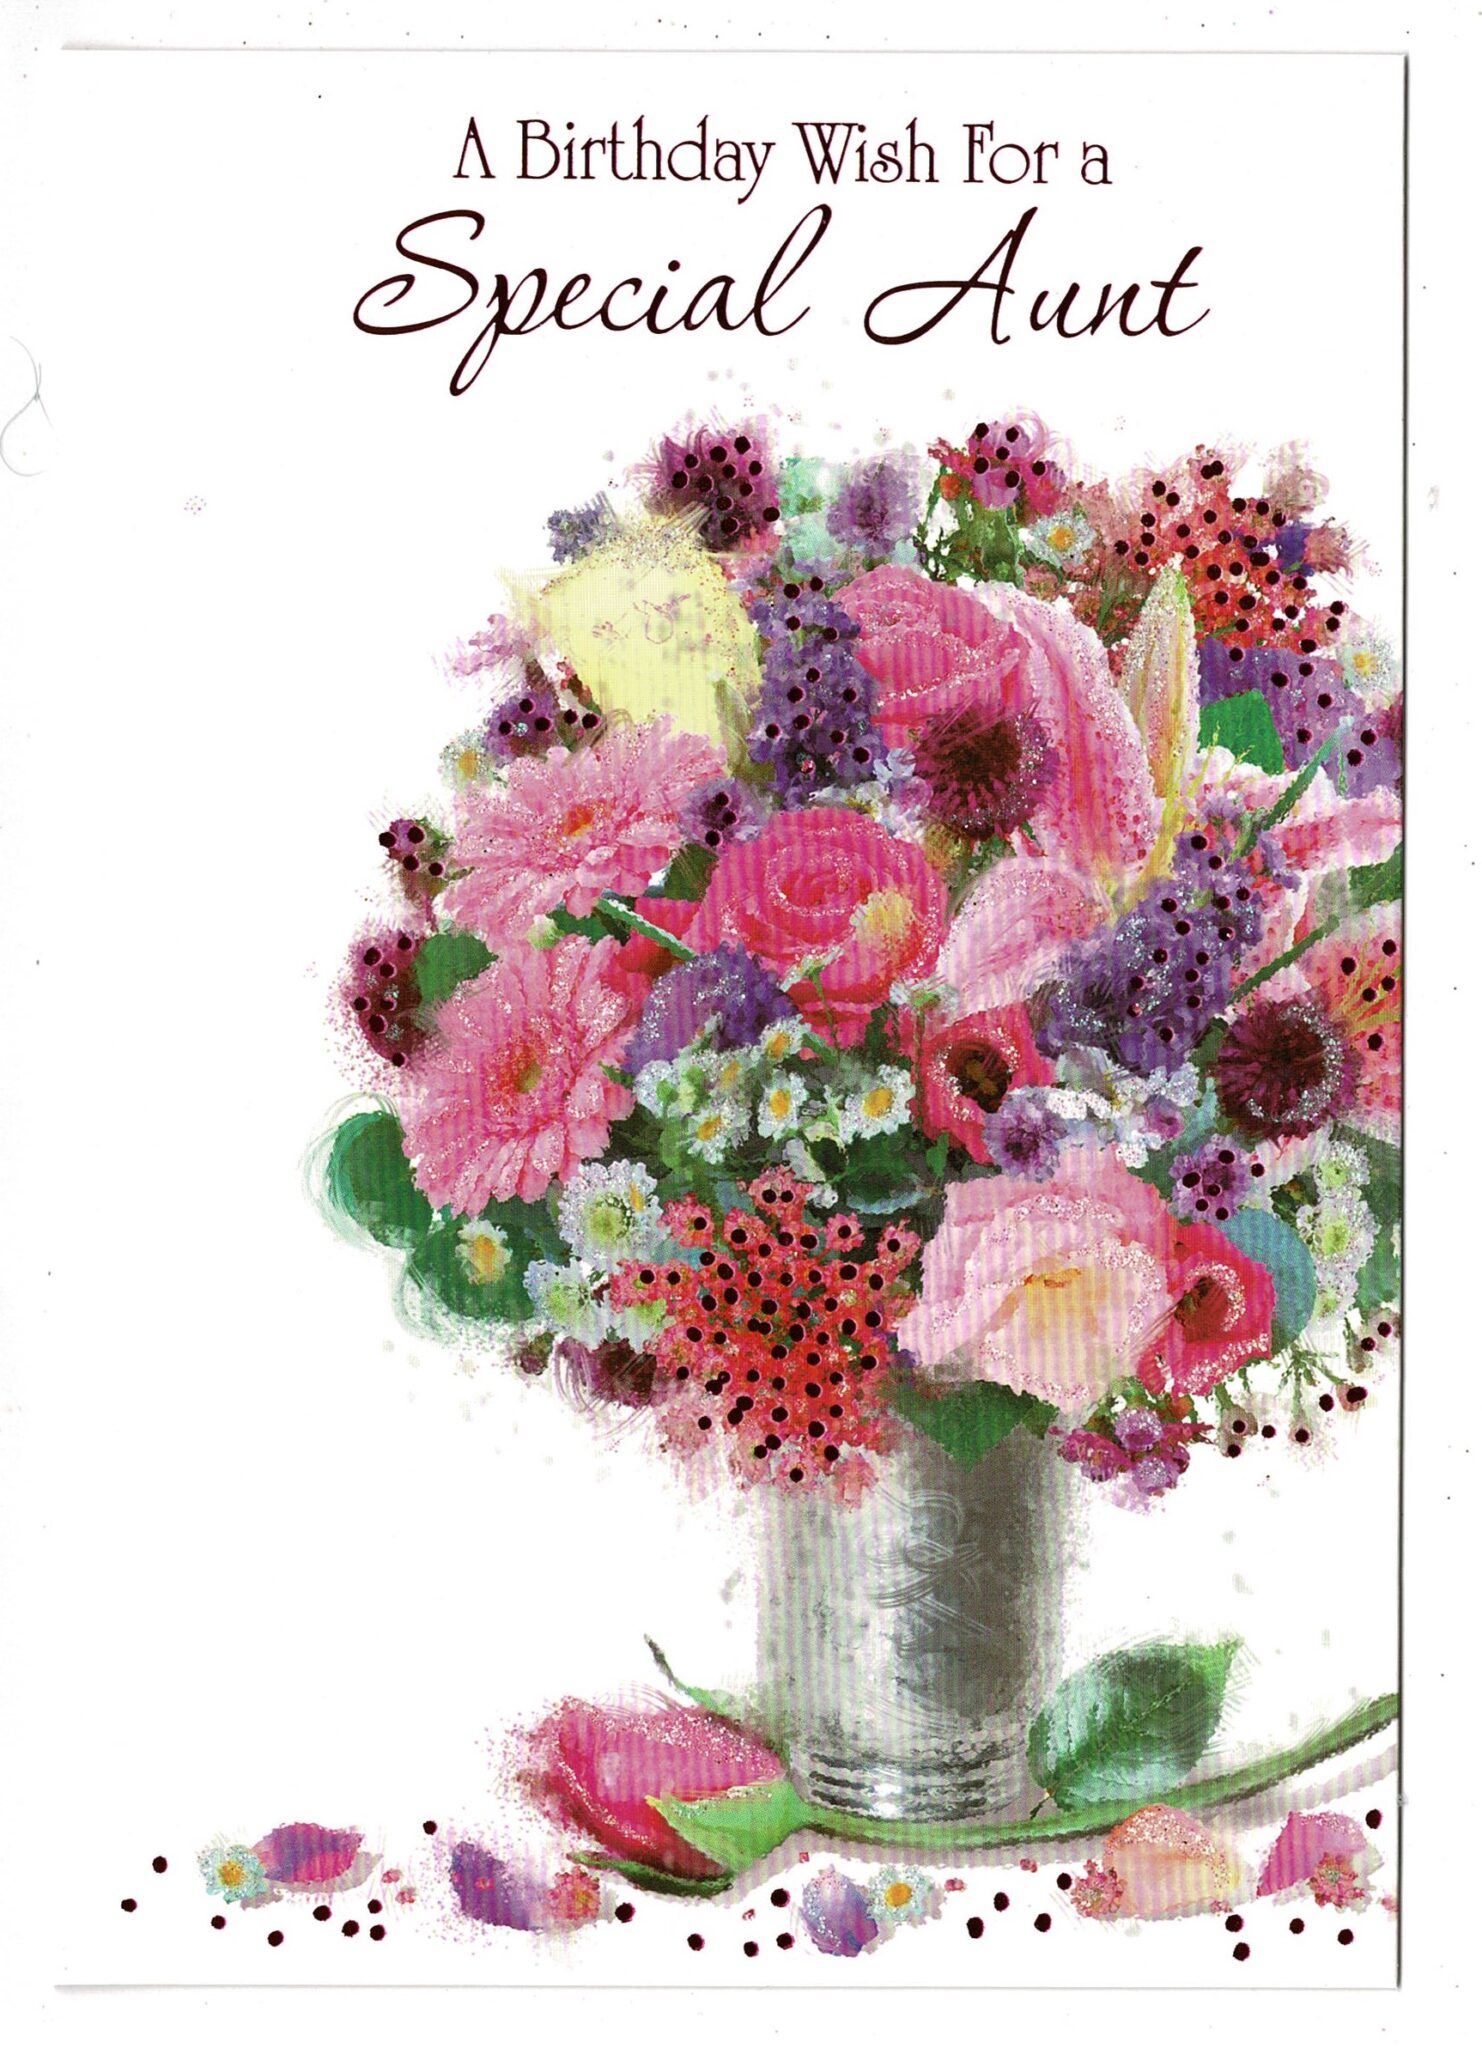 aunt-birthday-card-a-birthday-wish-for-a-special-aunt-with-floral